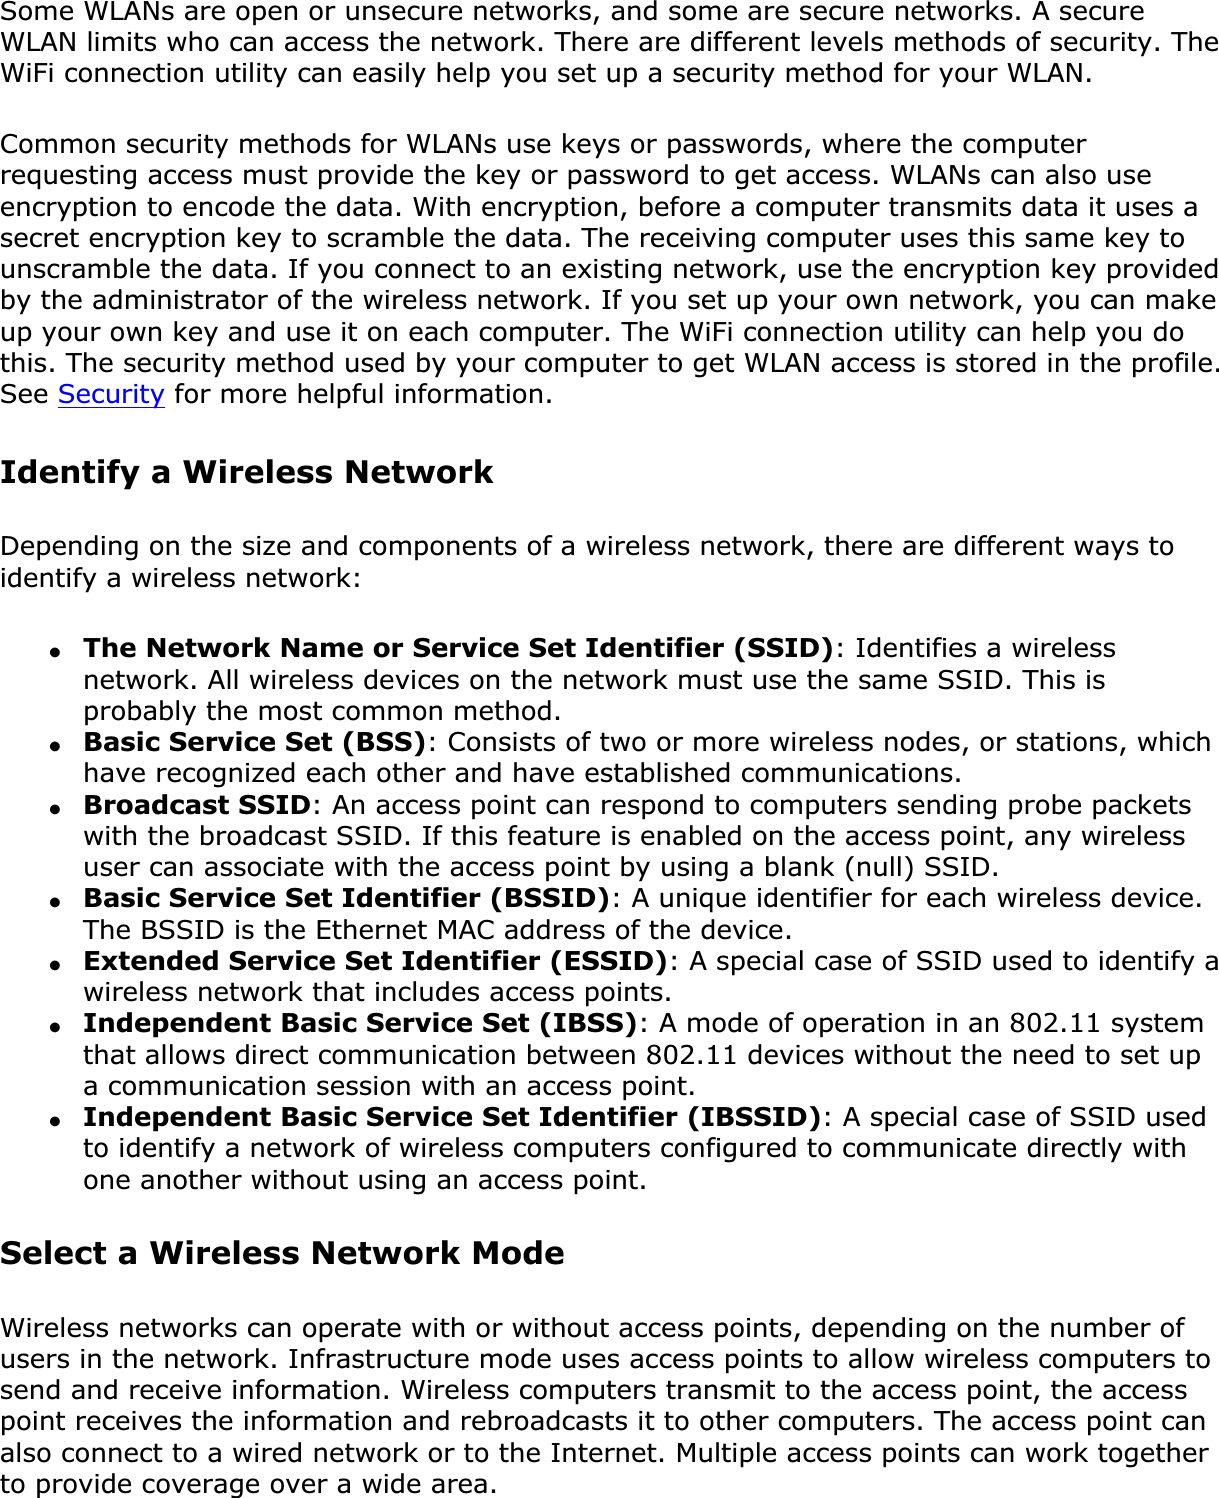 Some WLANs are open or unsecure networks, and some are secure networks. A secure WLAN limits who can access the network. There are different levels methods of security. The WiFi connection utility can easily help you set up a security method for your WLAN.Common security methods for WLANs use keys or passwords, where the computer requesting access must provide the key or password to get access. WLANs can also use encryption to encode the data. With encryption, before a computer transmits data it uses a secret encryption key to scramble the data. The receiving computer uses this same key to unscramble the data. If you connect to an existing network, use the encryption key provided by the administrator of the wireless network. If you set up your own network, you can make up your own key and use it on each computer. The WiFi connection utility can help you do this. The security method used by your computer to get WLAN access is stored in the profile. See Security for more helpful information.Identify a Wireless NetworkDepending on the size and components of a wireless network, there are different ways to identify a wireless network:●The Network Name or Service Set Identifier (SSID): Identifies a wireless network. All wireless devices on the network must use the same SSID. This is probably the most common method.●Basic Service Set (BSS): Consists of two or more wireless nodes, or stations, which have recognized each other and have established communications.●Broadcast SSID: An access point can respond to computers sending probe packets with the broadcast SSID. If this feature is enabled on the access point, any wireless user can associate with the access point by using a blank (null) SSID.●Basic Service Set Identifier (BSSID): A unique identifier for each wireless device. The BSSID is the Ethernet MAC address of the device.●Extended Service Set Identifier (ESSID): A special case of SSID used to identify a wireless network that includes access points.●Independent Basic Service Set (IBSS): A mode of operation in an 802.11 system that allows direct communication between 802.11 devices without the need to set up a communication session with an access point.●Independent Basic Service Set Identifier (IBSSID): A special case of SSID used to identify a network of wireless computers configured to communicate directly with one another without using an access point.Select a Wireless Network ModeWireless networks can operate with or without access points, depending on the number of users in the network. Infrastructure mode uses access points to allow wireless computers to send and receive information. Wireless computers transmit to the access point, the access point receives the information and rebroadcasts it to other computers. The access point can also connect to a wired network or to the Internet. Multiple access points can work together to provide coverage over a wide area.